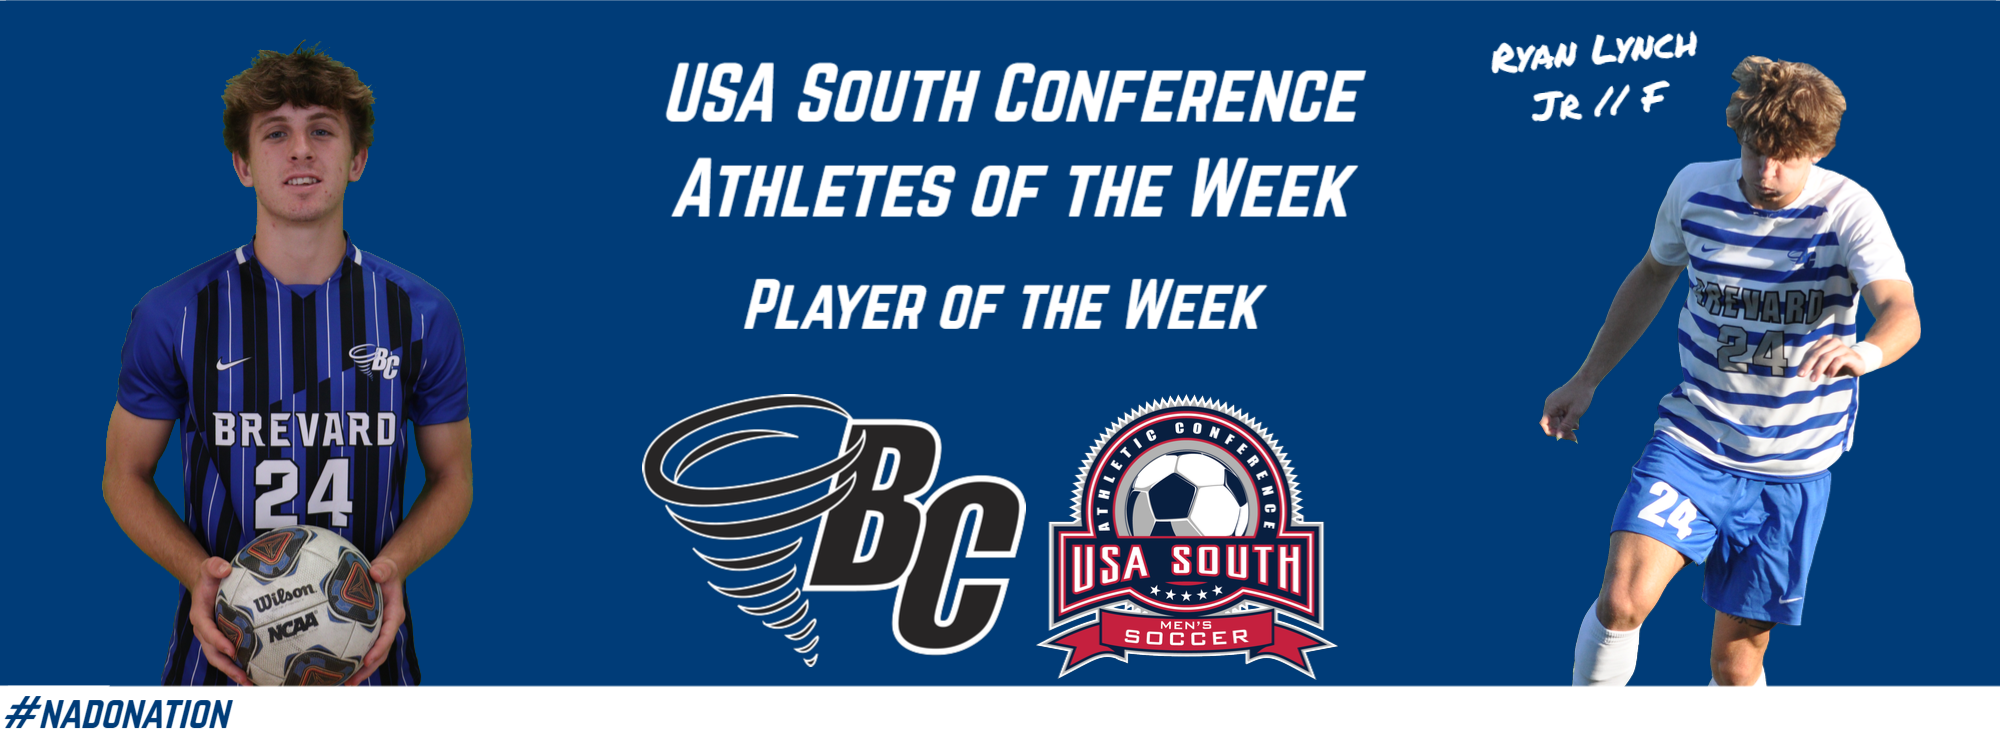 Lynch Named USA South Player of the Week for Second-Straight Week